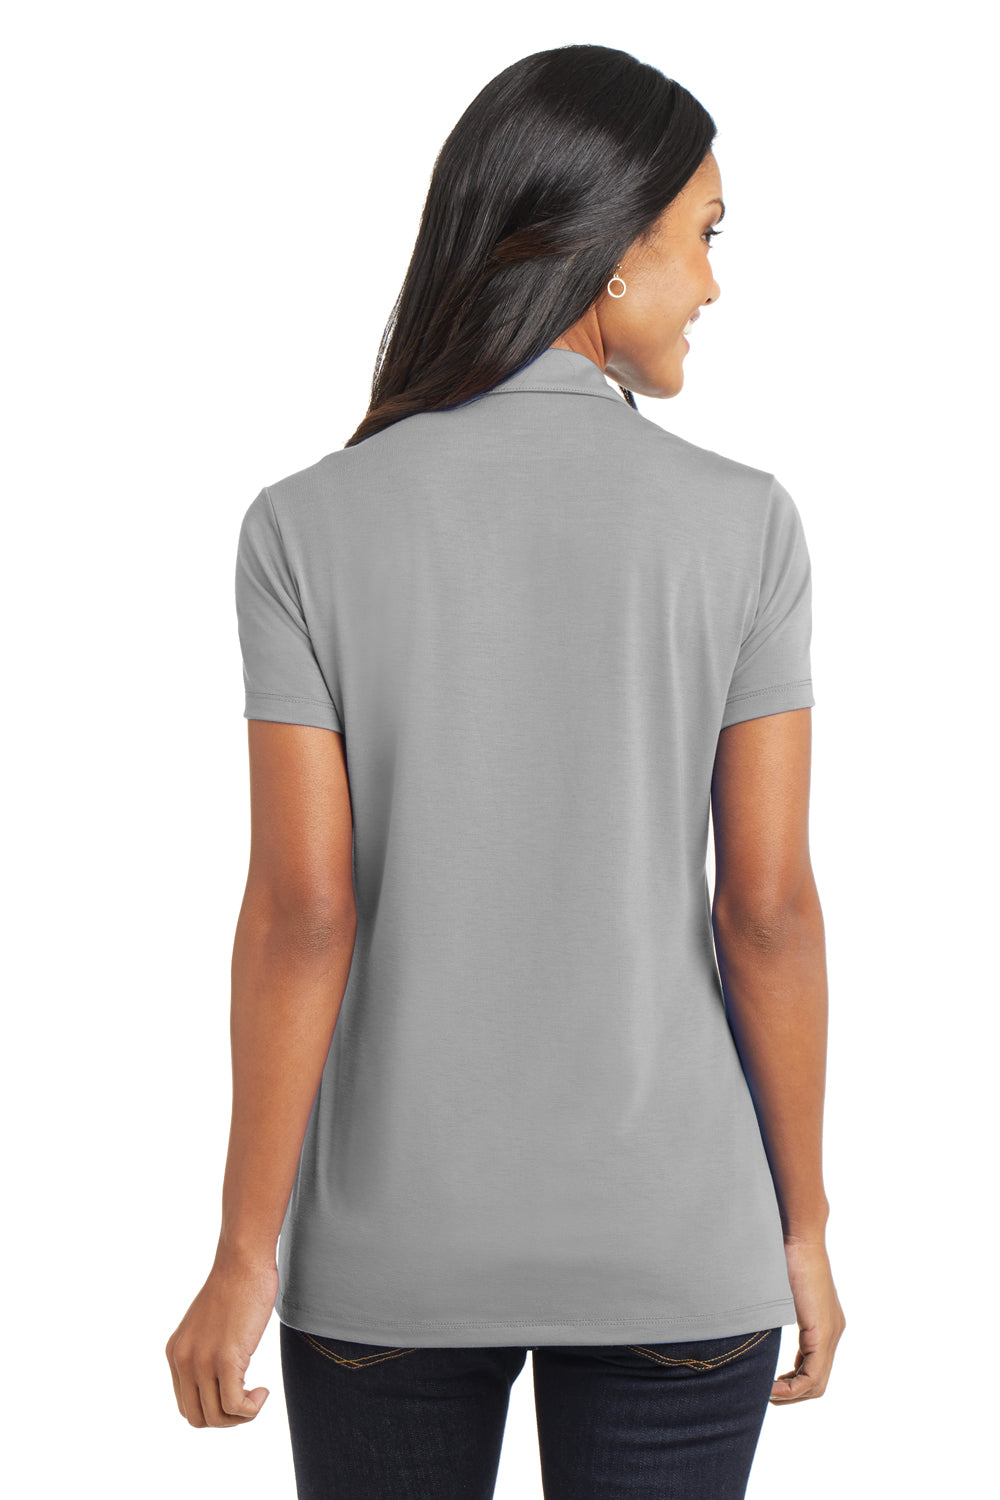 Port Authority L568 Womens Cotton Touch Performance Moisture Wicking Short Sleeve Polo Shirt Grey Back